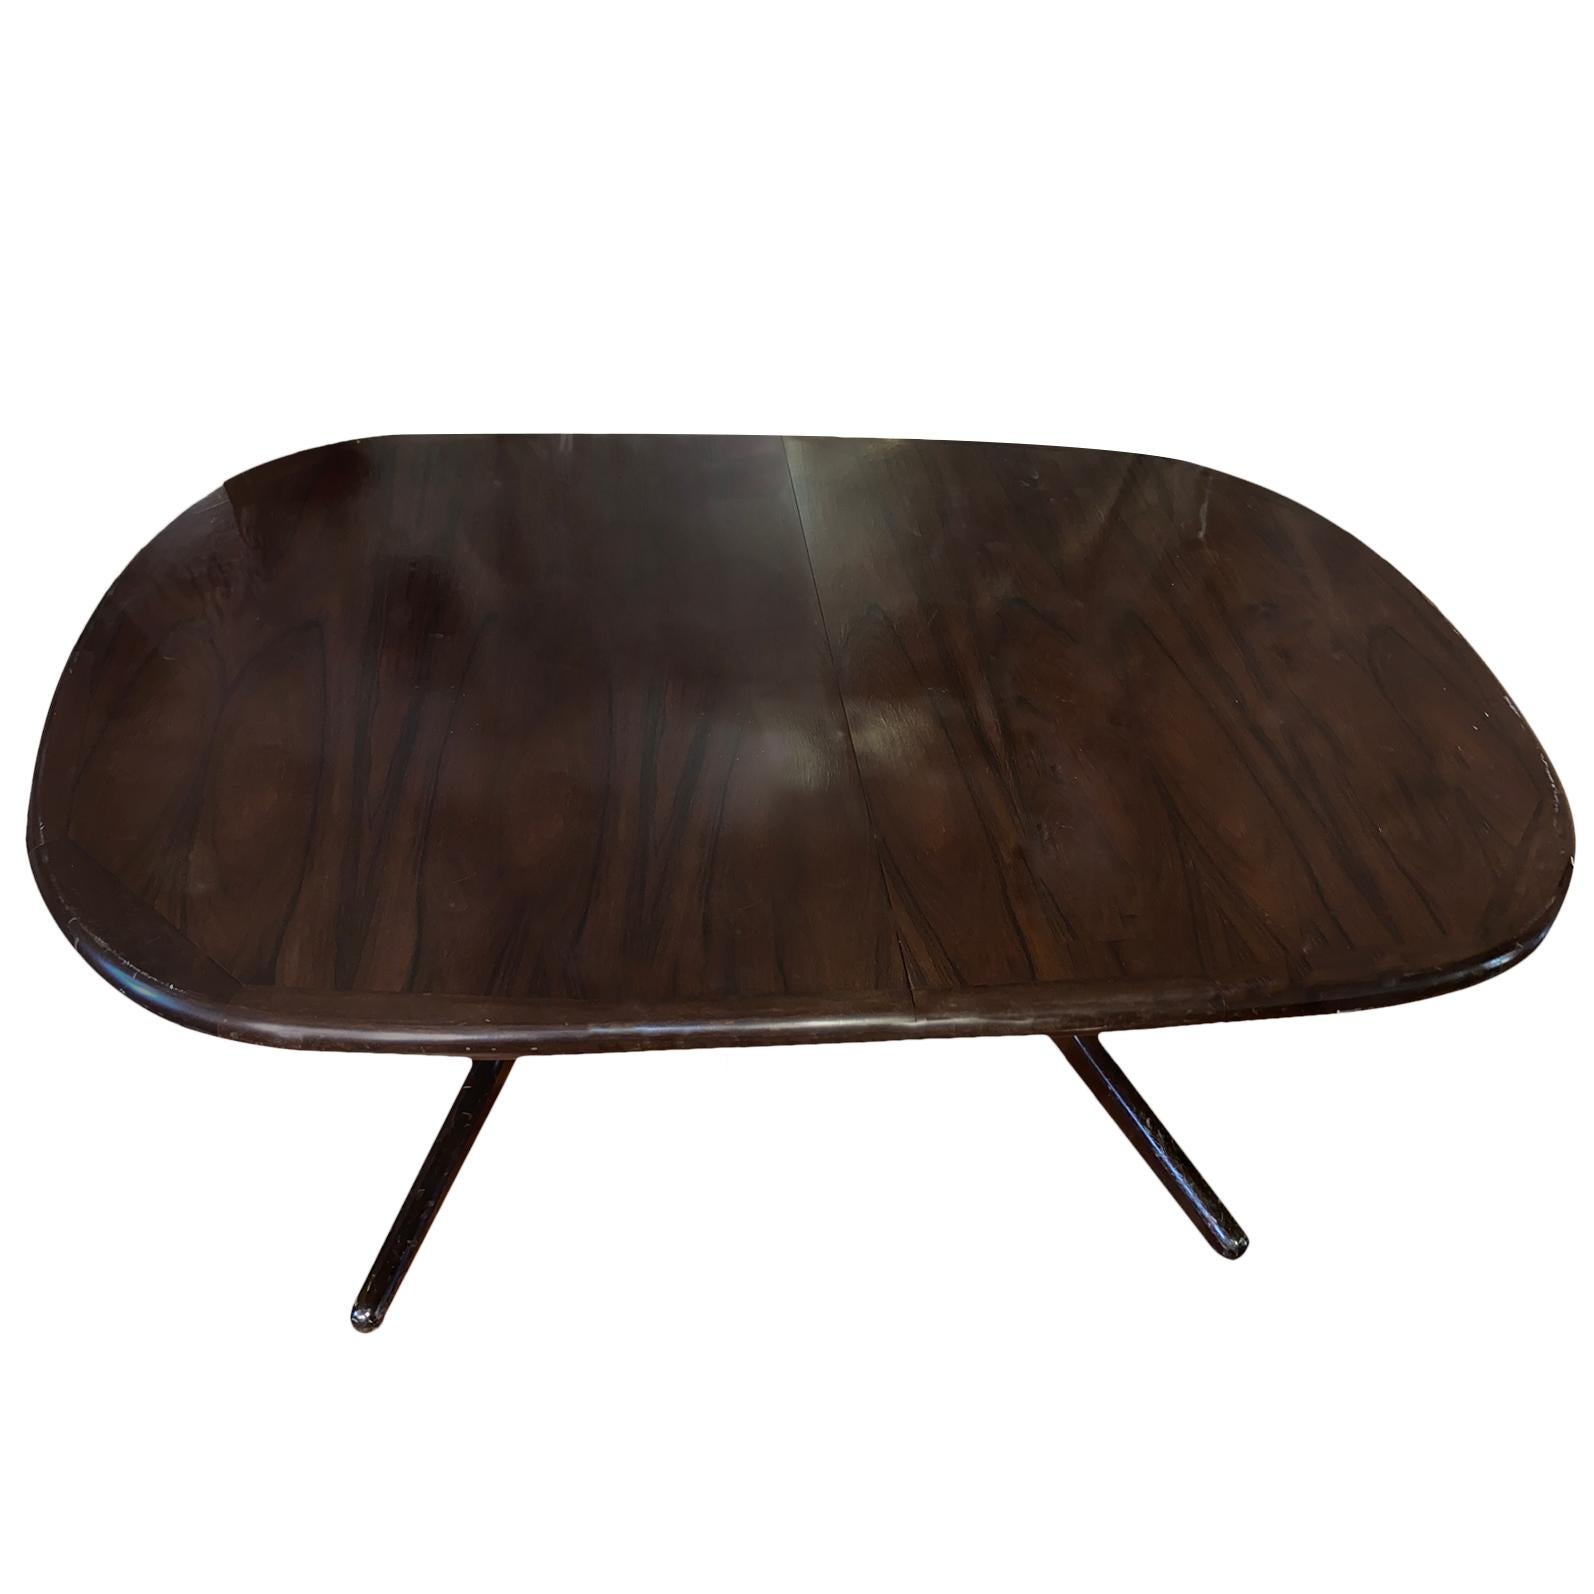 A circa 1960's Danish rosewood oval dining table with 2 extension leaves that measure 19